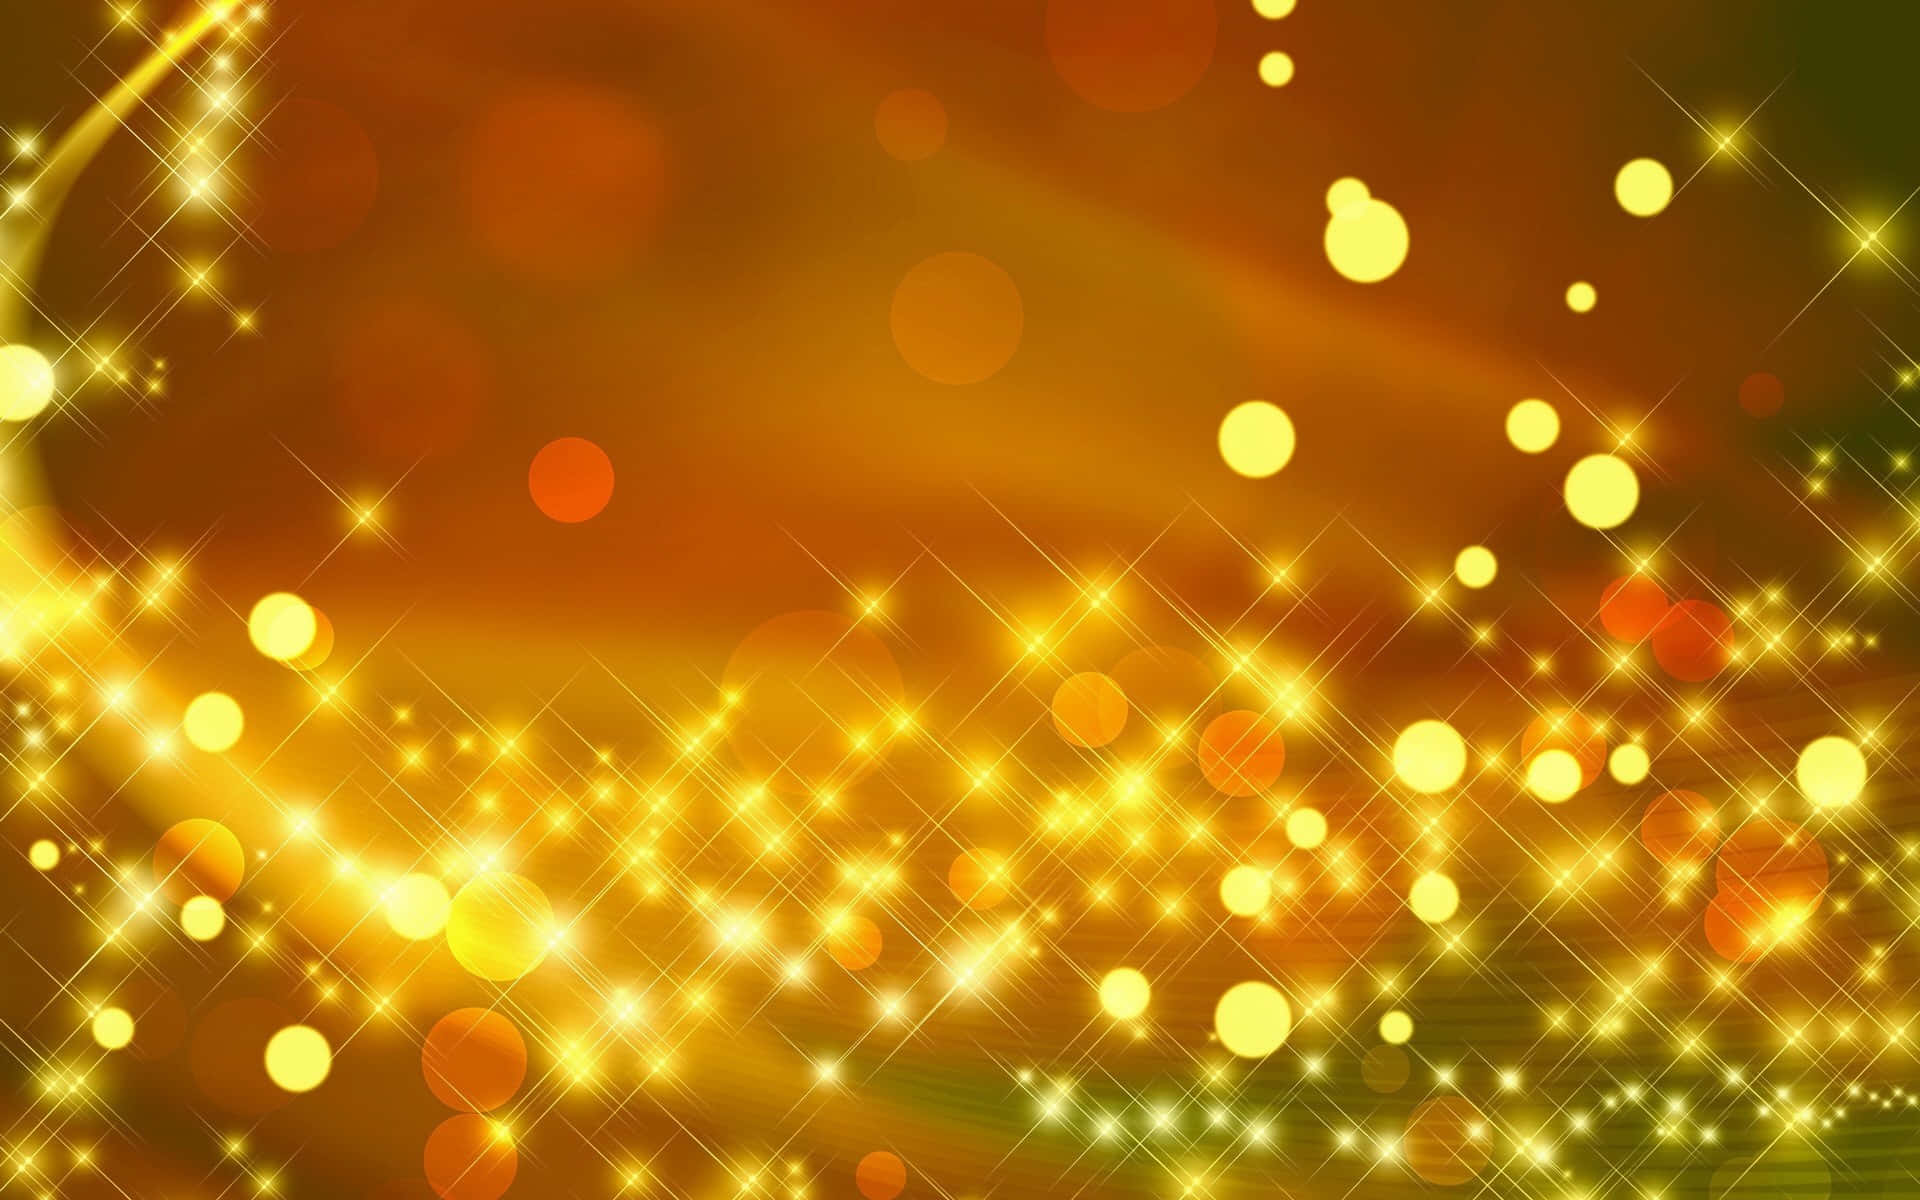 A stunningly beautiful high-resolution gold background.